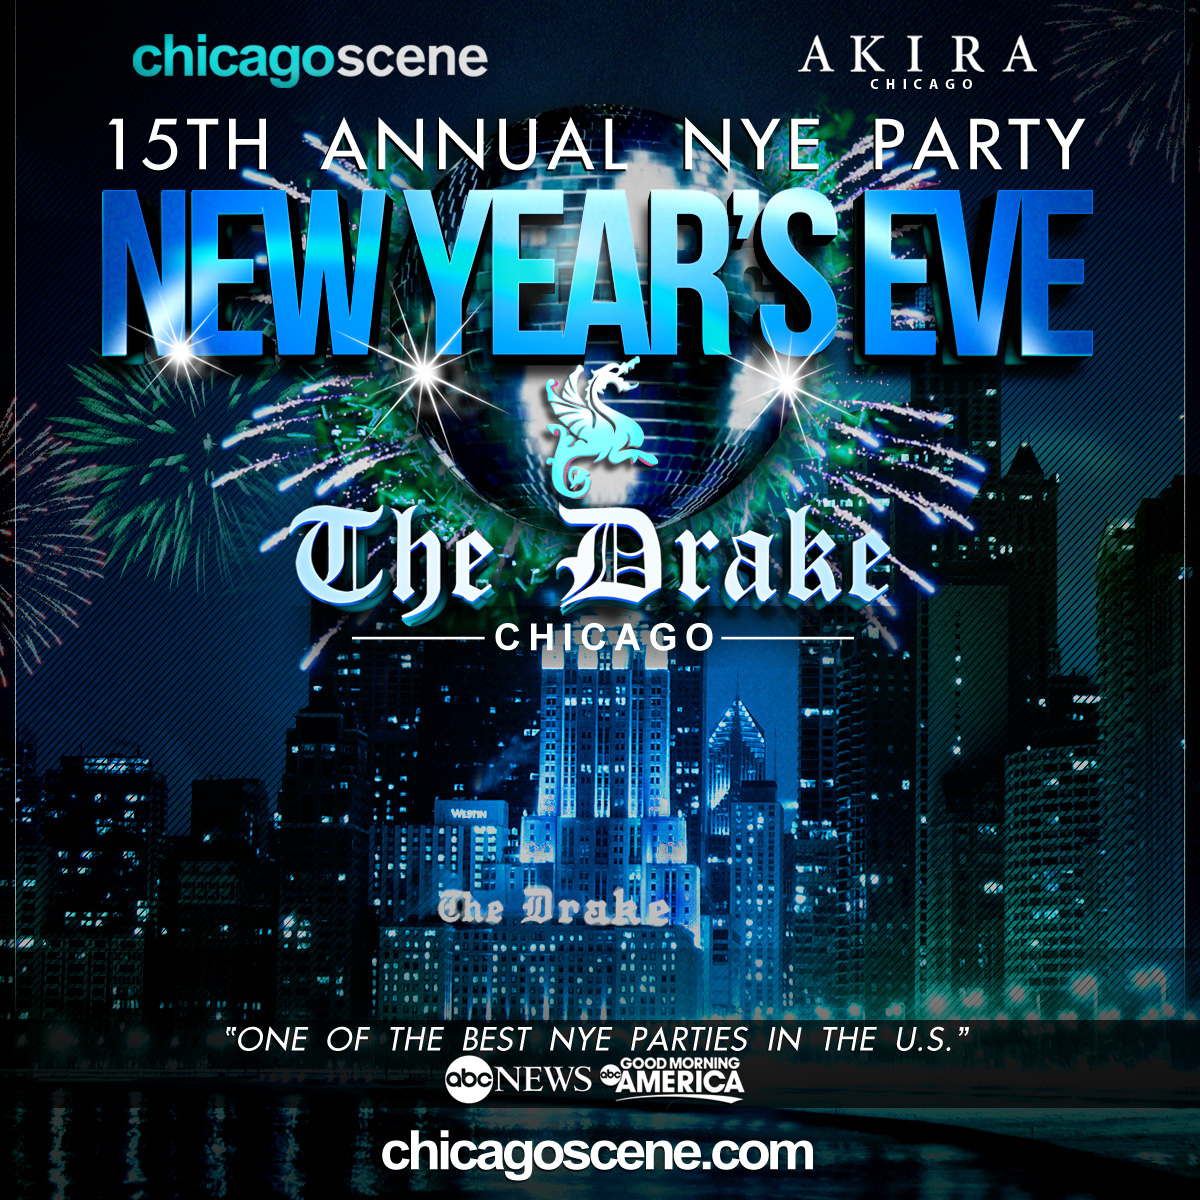 CHICAGO SCENE WILL HOST THE 15th ANNIVERSARY NEW YEAR’S EVE PARTY AT THE DRAKE HOTEL 1 Considered one of the top New Year’s Eve parties by ABC’s Good morning America, Red Eye andAOL City Guide, the Chicago Scene 15th Annual New Year’s Eve Party is back by popular demand at the historic Drake Hotel, 140 E Walton Pl. The party is considered the most upscale Hotel party in Chicago and draws over 2,500 attendees each year. Known for its hugely popular events attended by thousands of Chicagoans, including the Chicago Scene Boat party, River North Craft Beer Pub Crawl, Highwood Craft Beer Festival,Chicago Scene invites Chicagoans to experience the hottest party of the year and ring in 2015 with style.